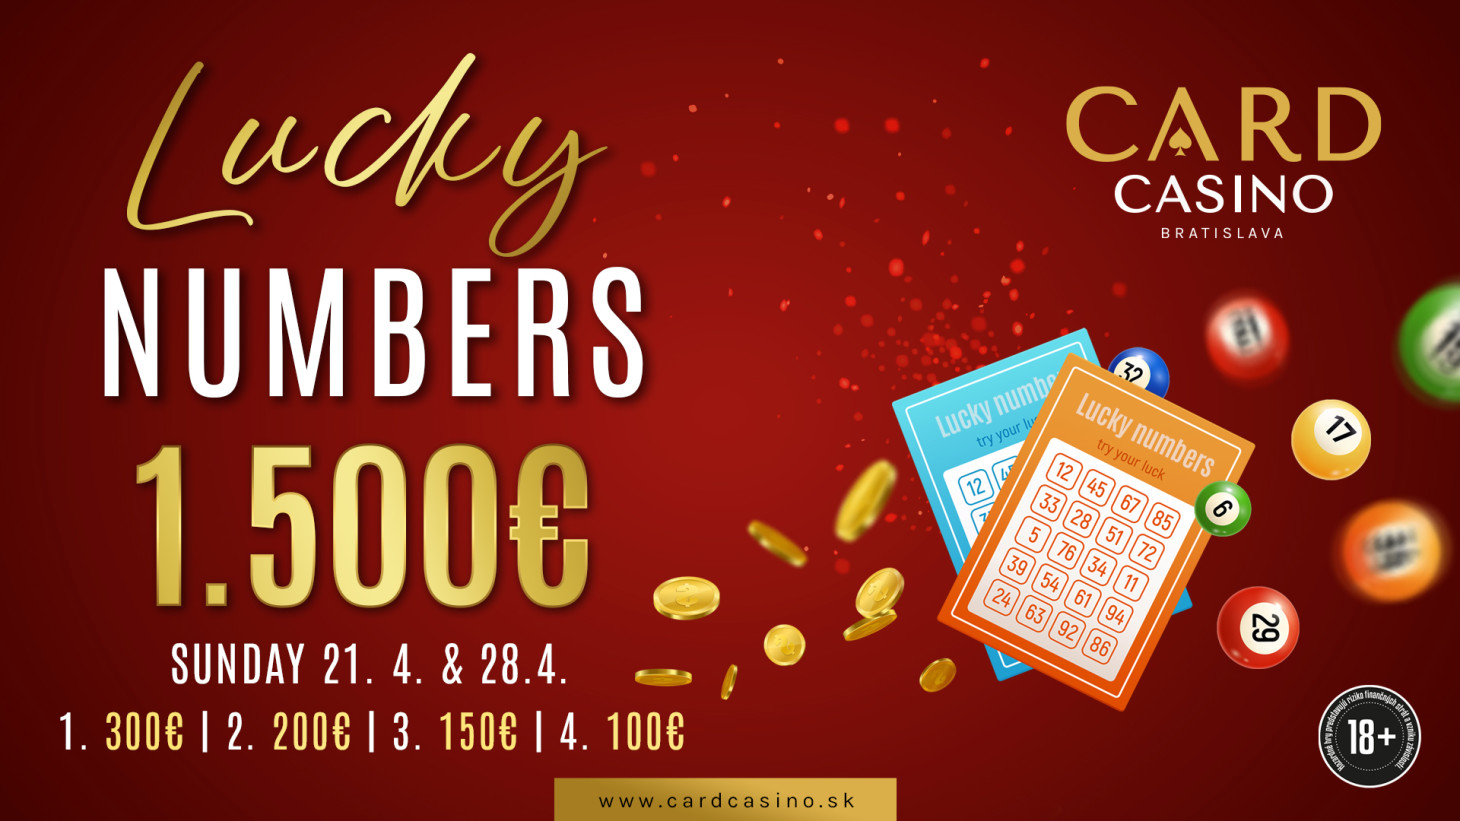 Sundays belong to Lucky numbers! Playing for beautiful prizes